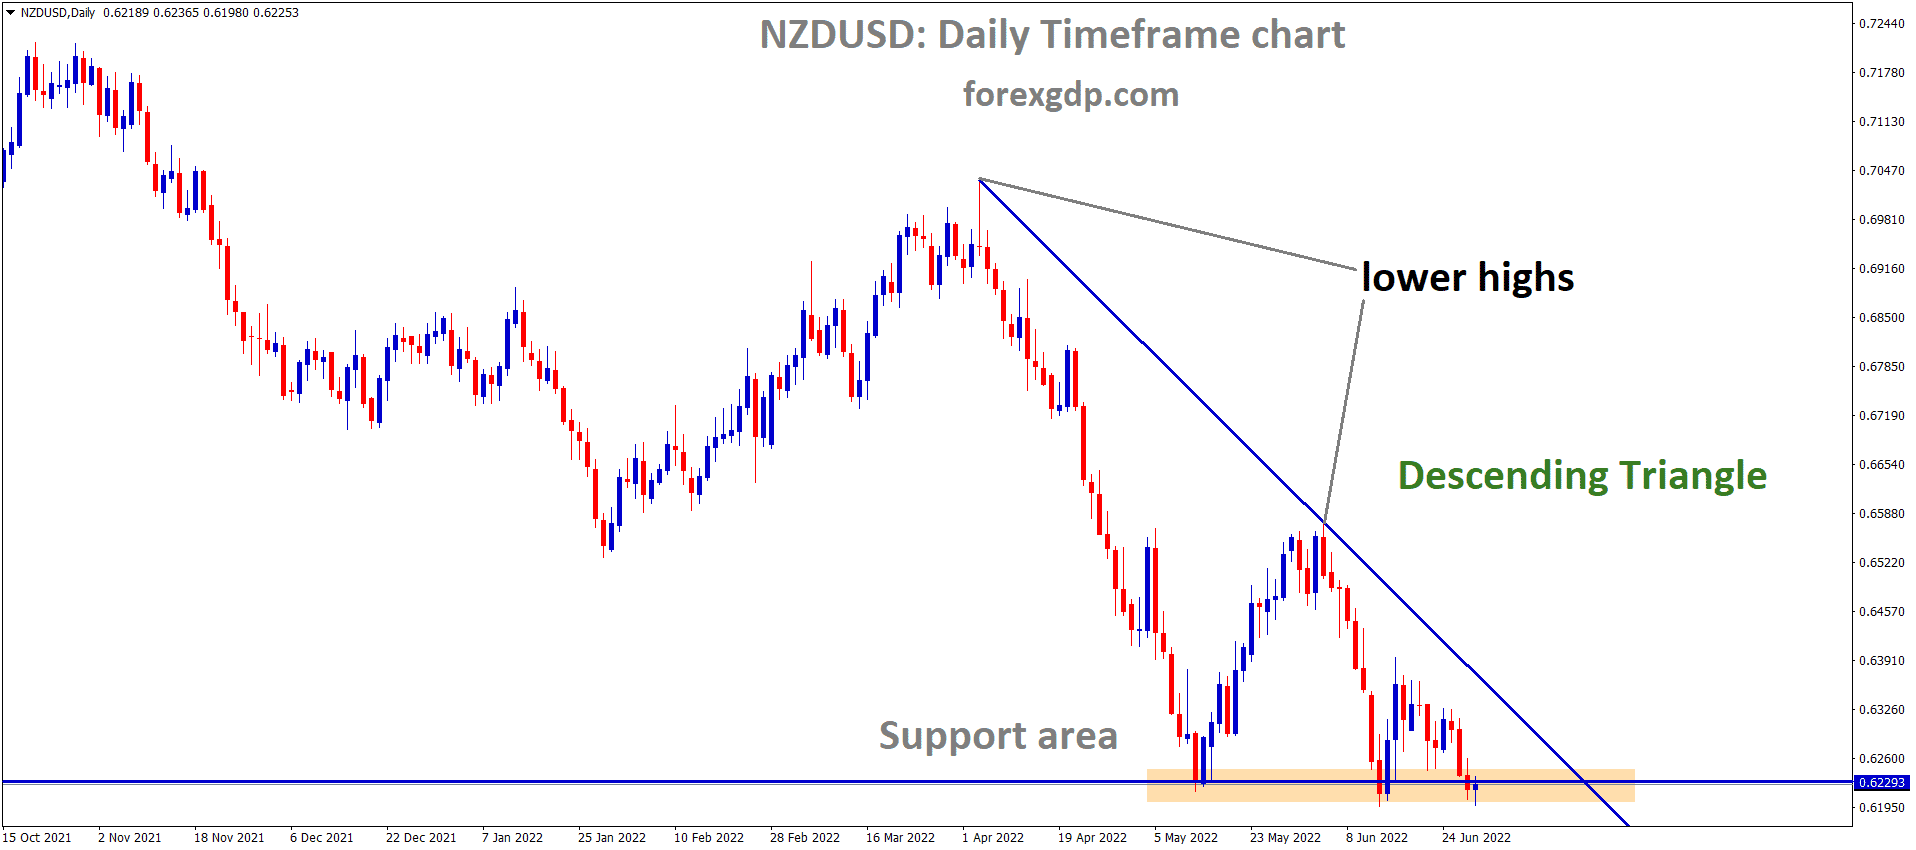 NZDUSD is moving in the Descending triangle pattern and the Market has rebounded from the Horizontal support area of the Pattern.